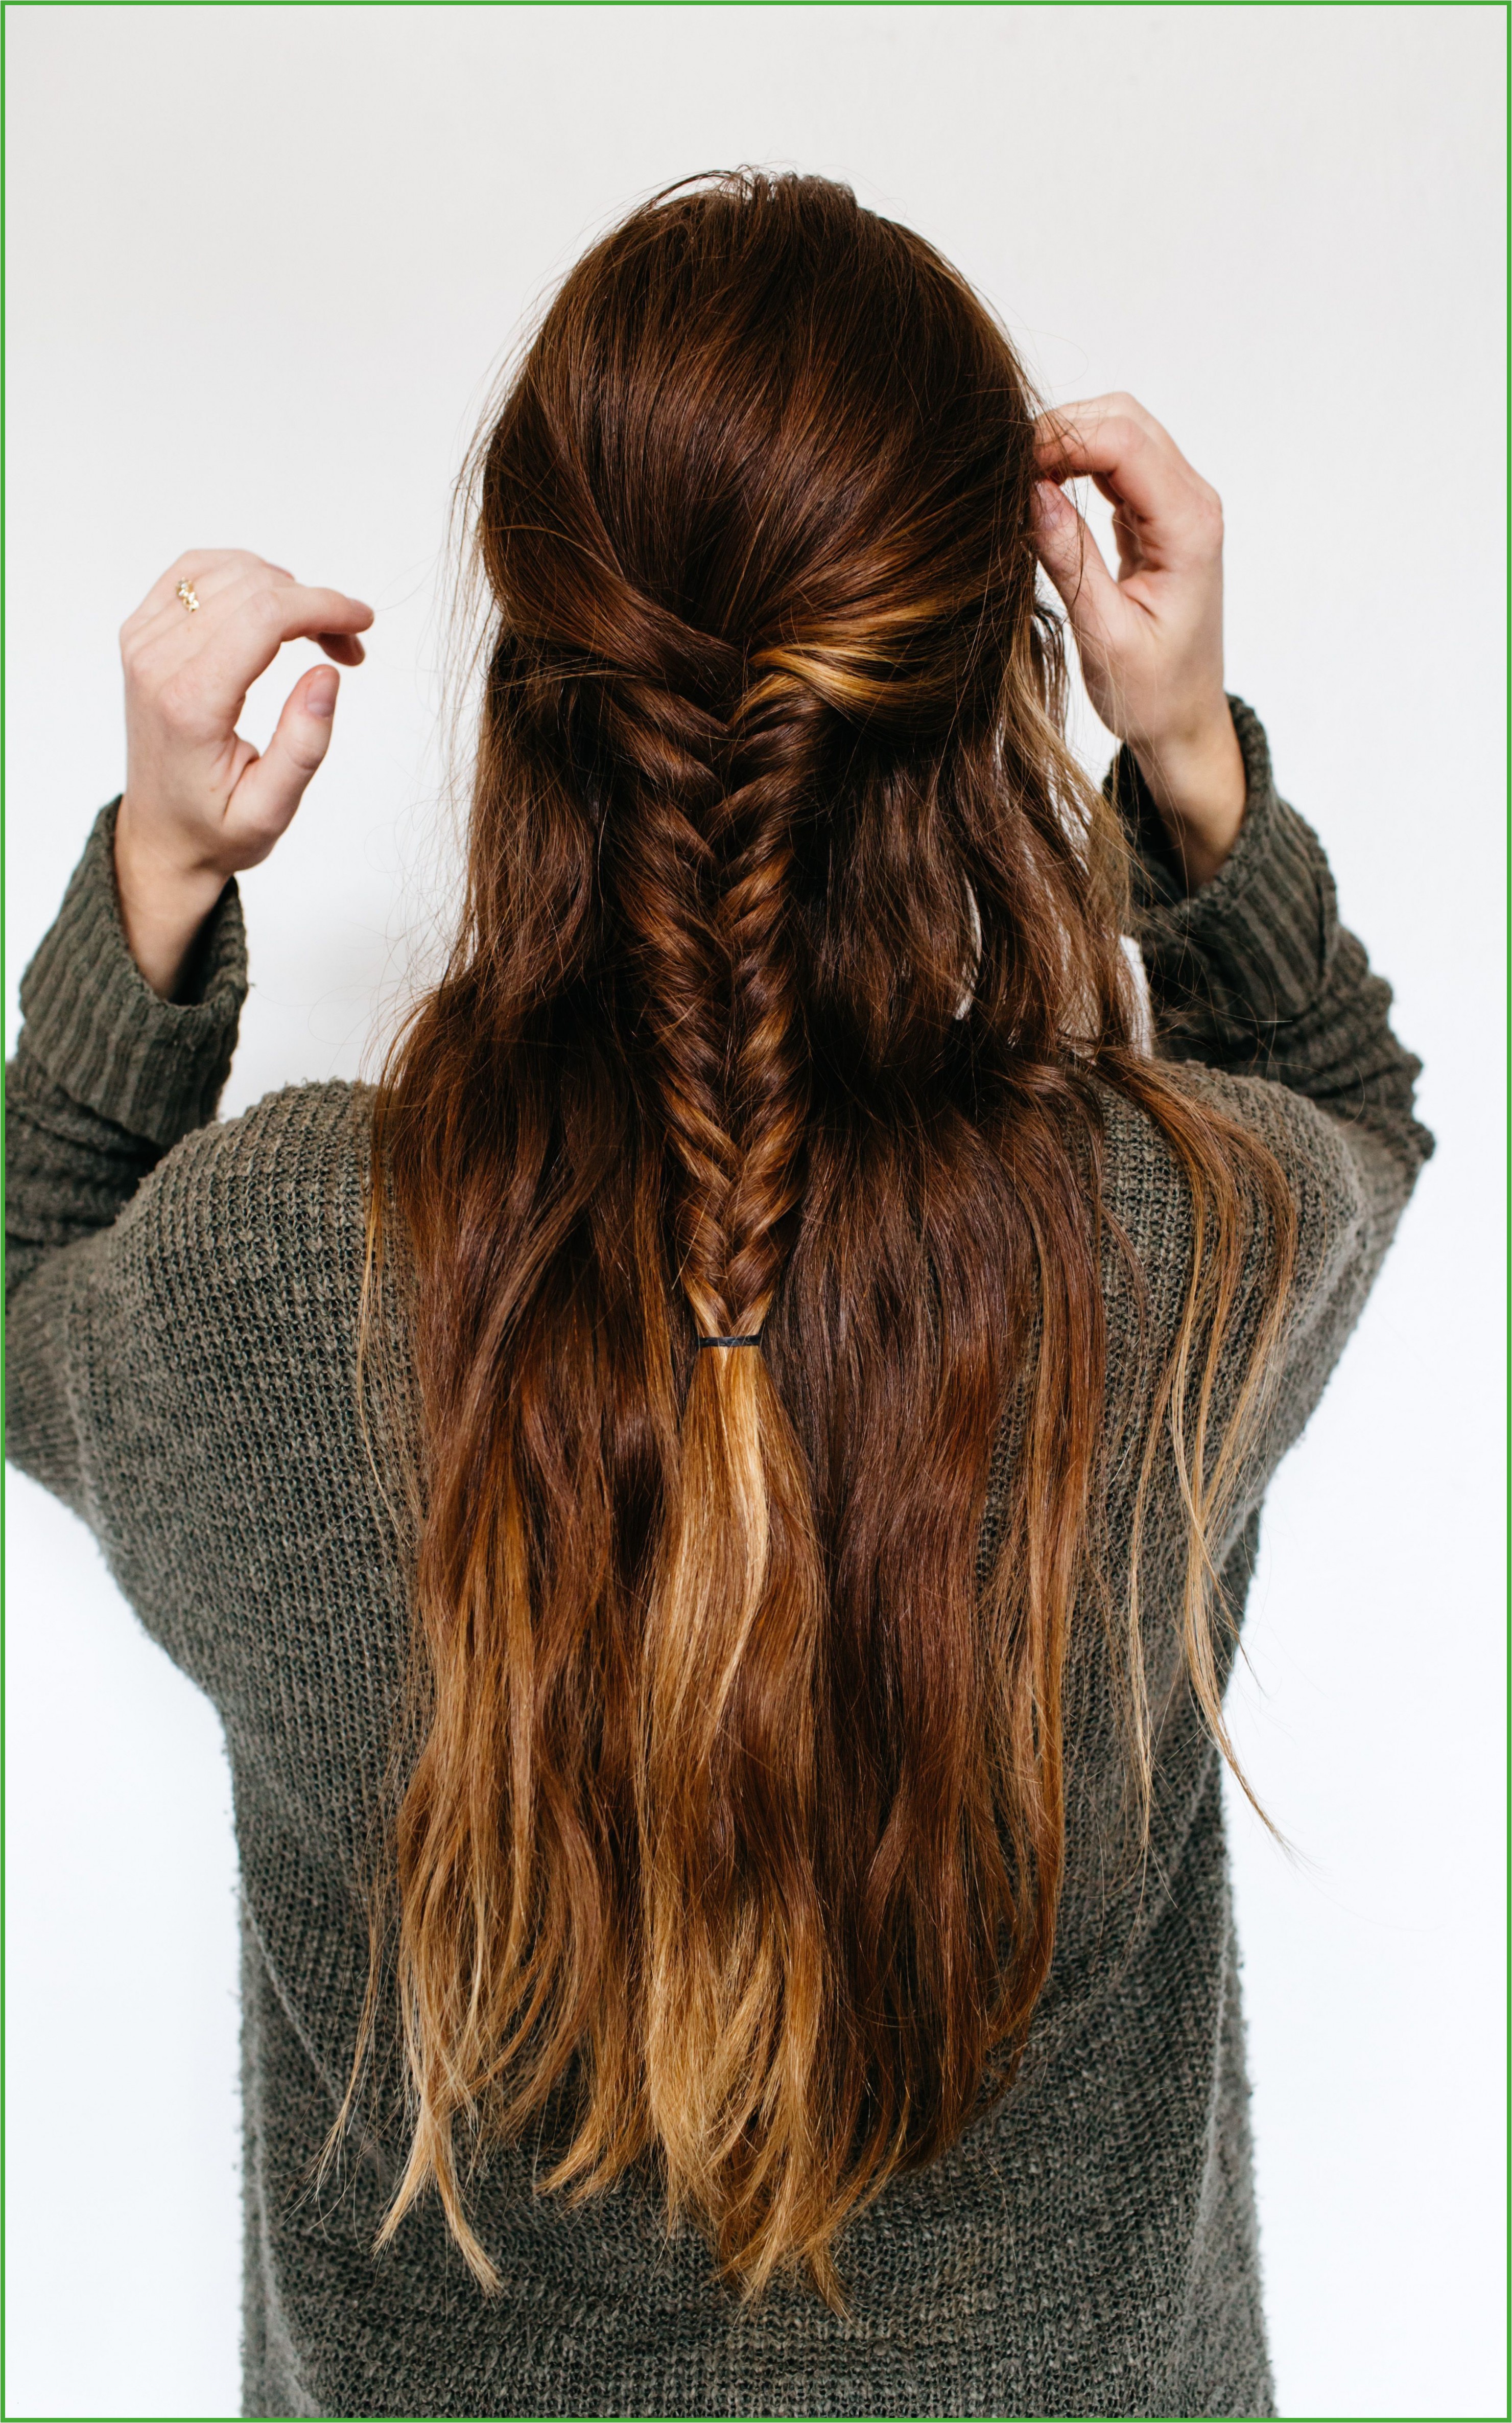 Updo Braid Hairstyles Luxury Half Up Half Down Fishtail Braid Hairstyle for Thick Medium Length